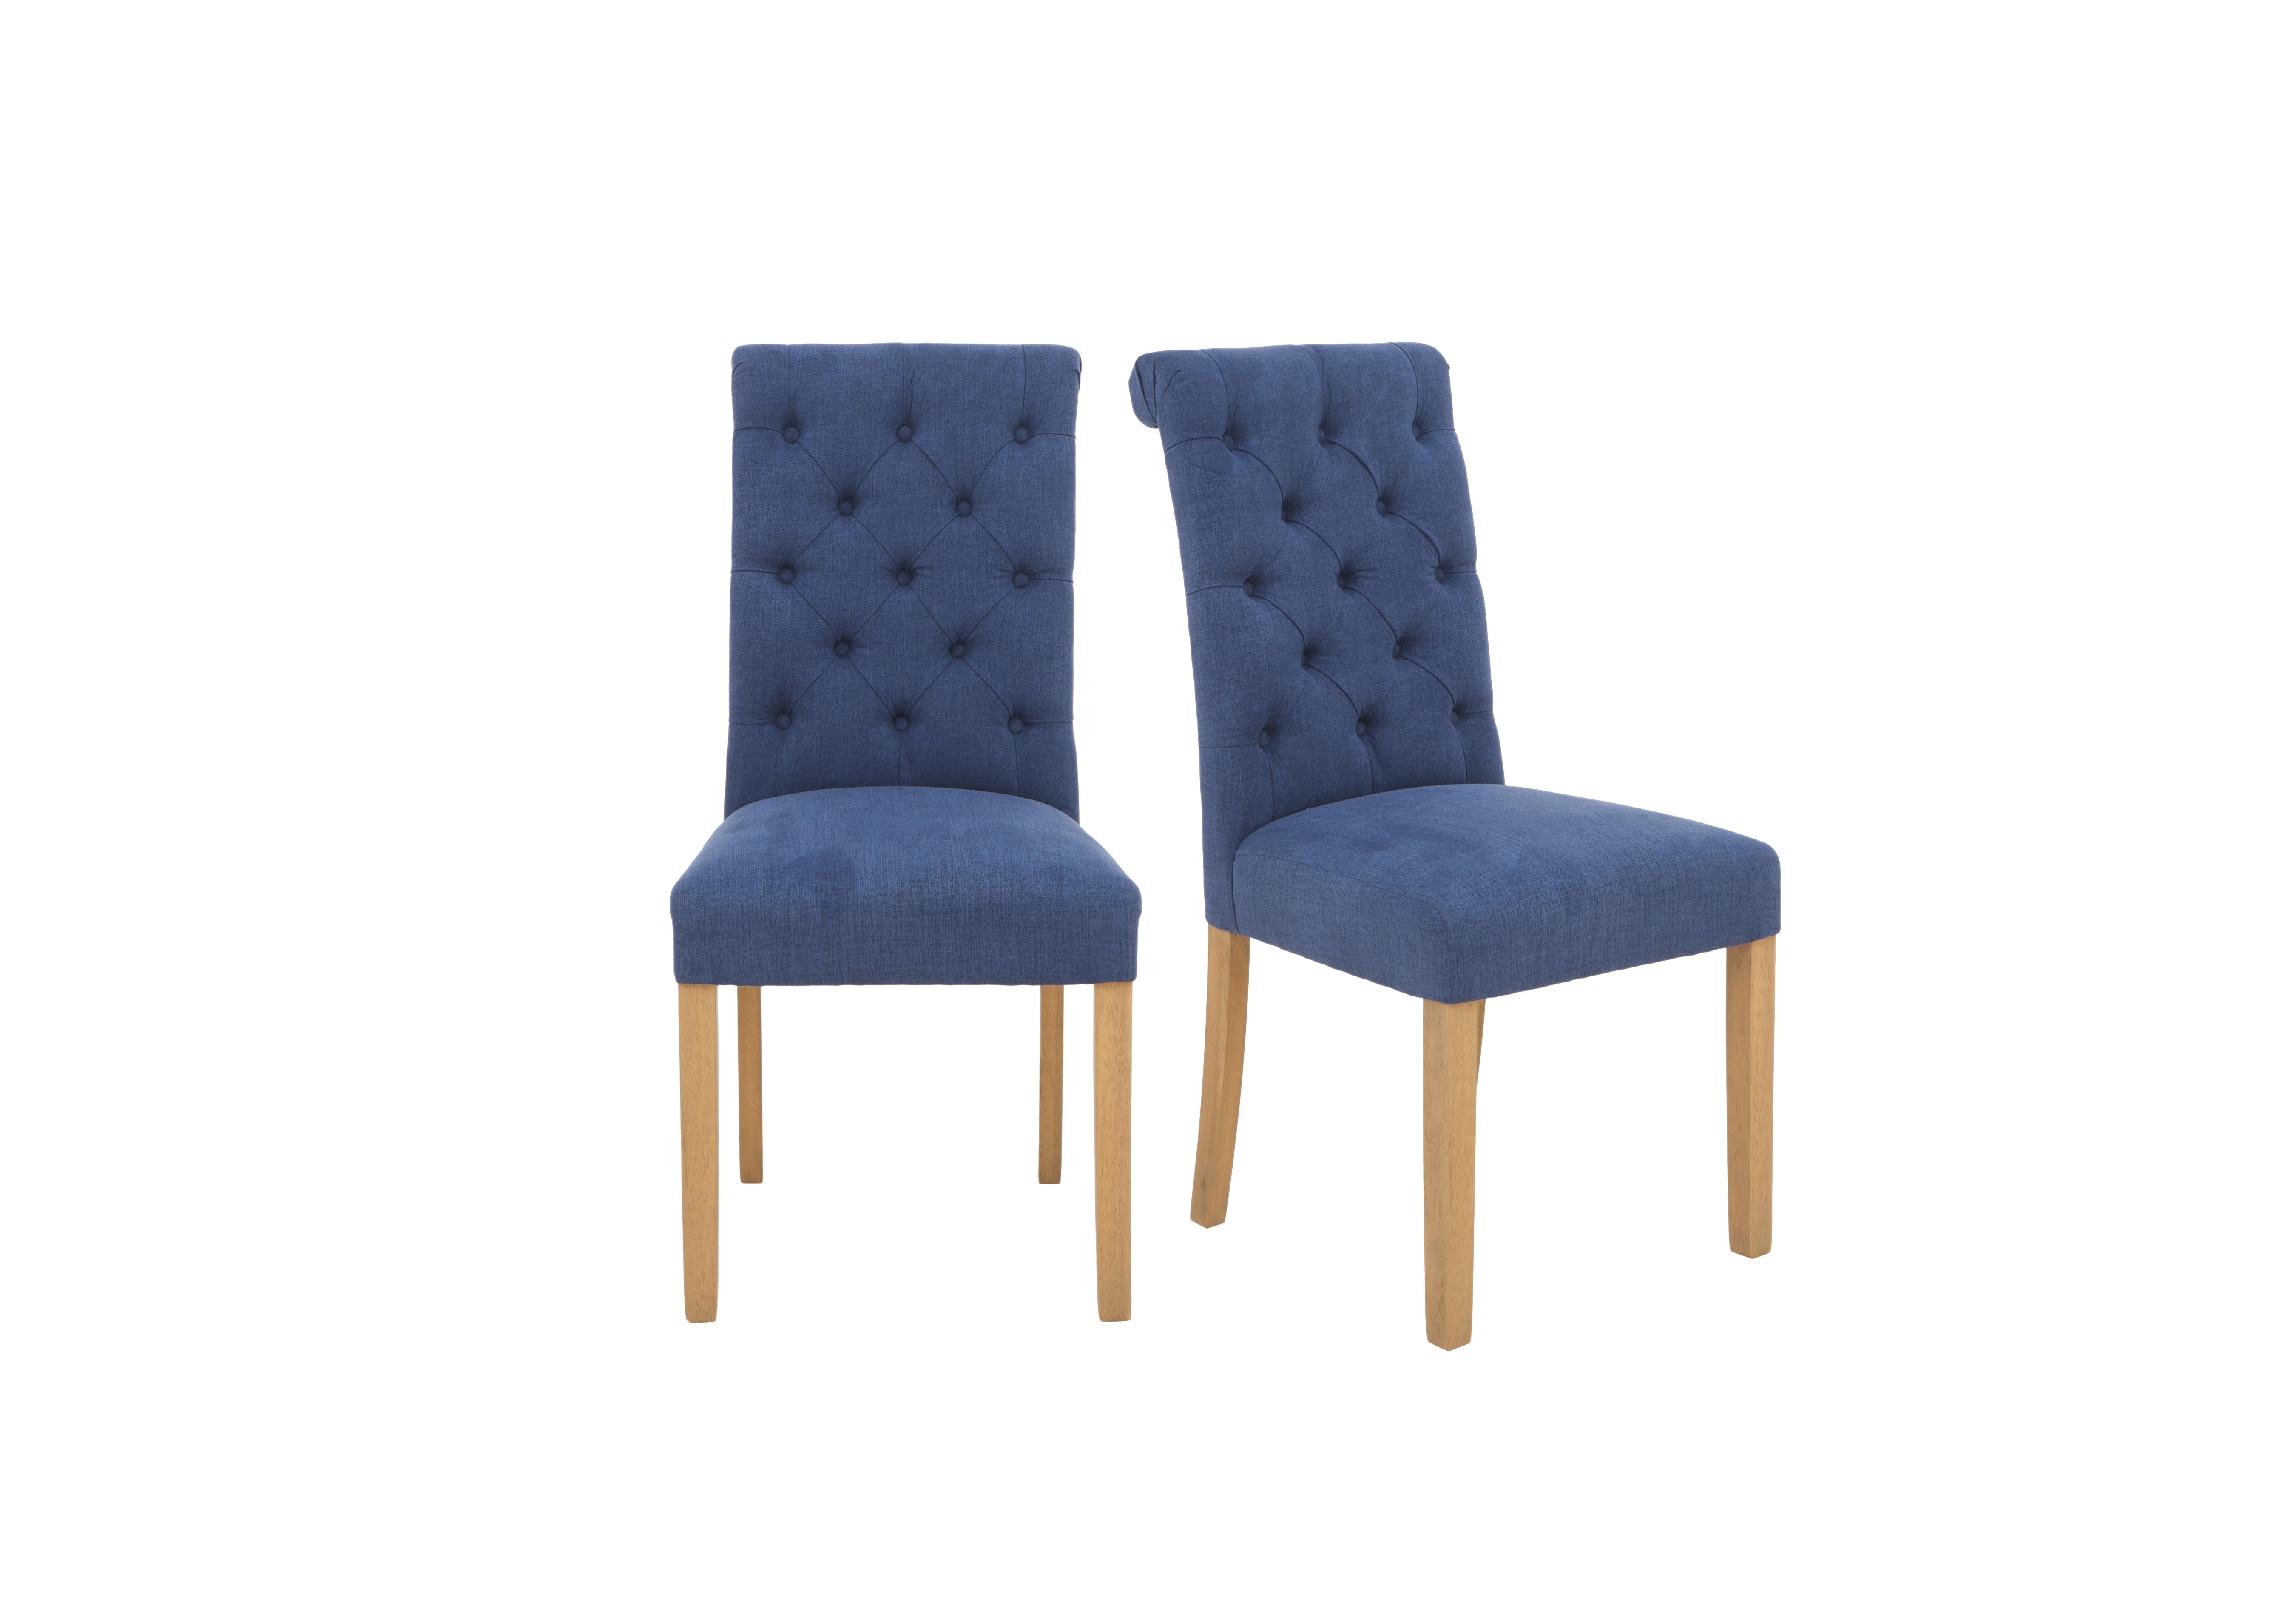 Hamilton Pair of Button Back Dining Chairs in Denim on Furniture Village